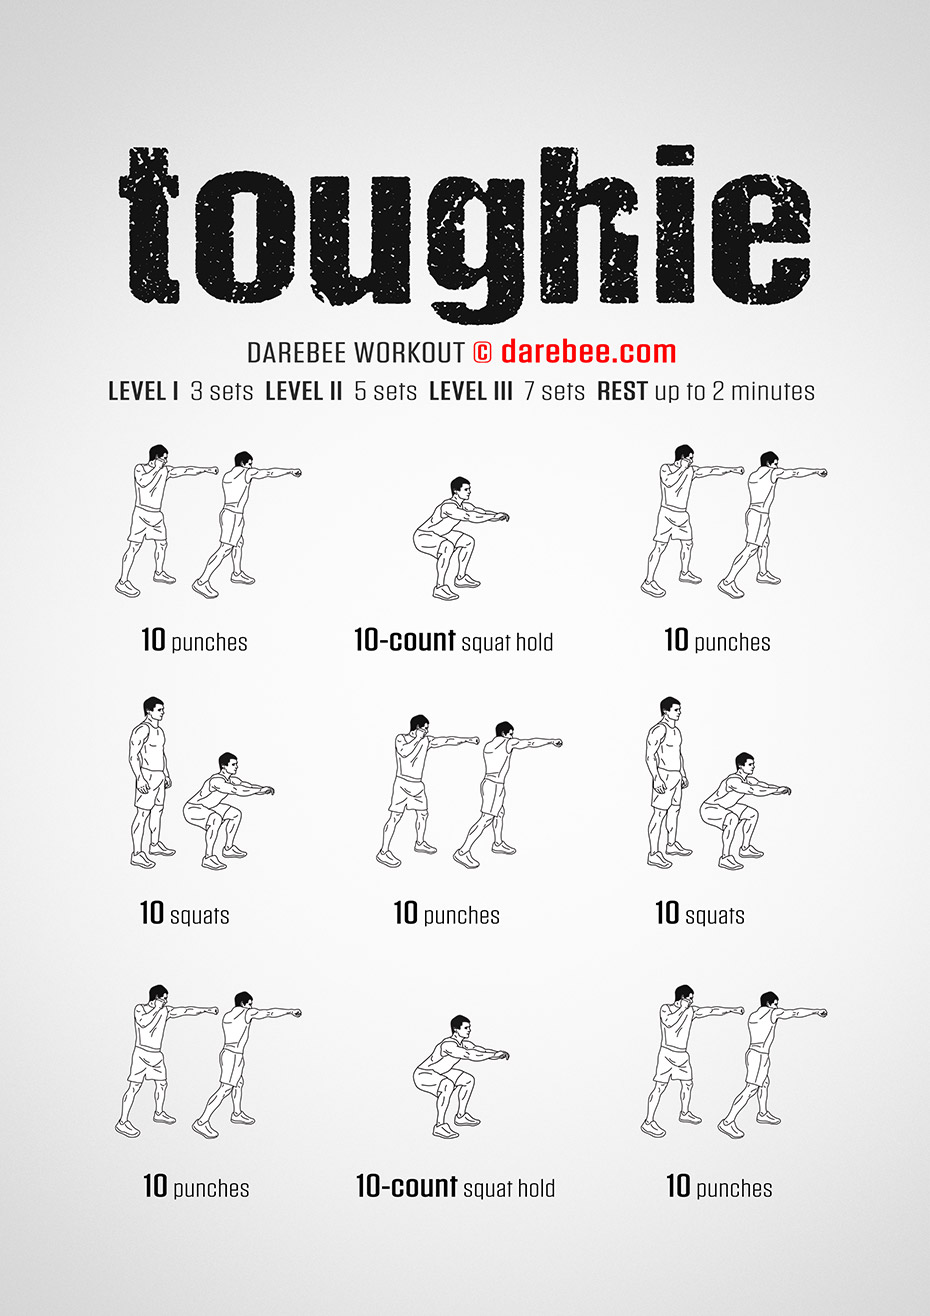 Toughie is a DAREBEE no-equipment home fitness, total body workout that helps you feel stronger and get healthier at home.